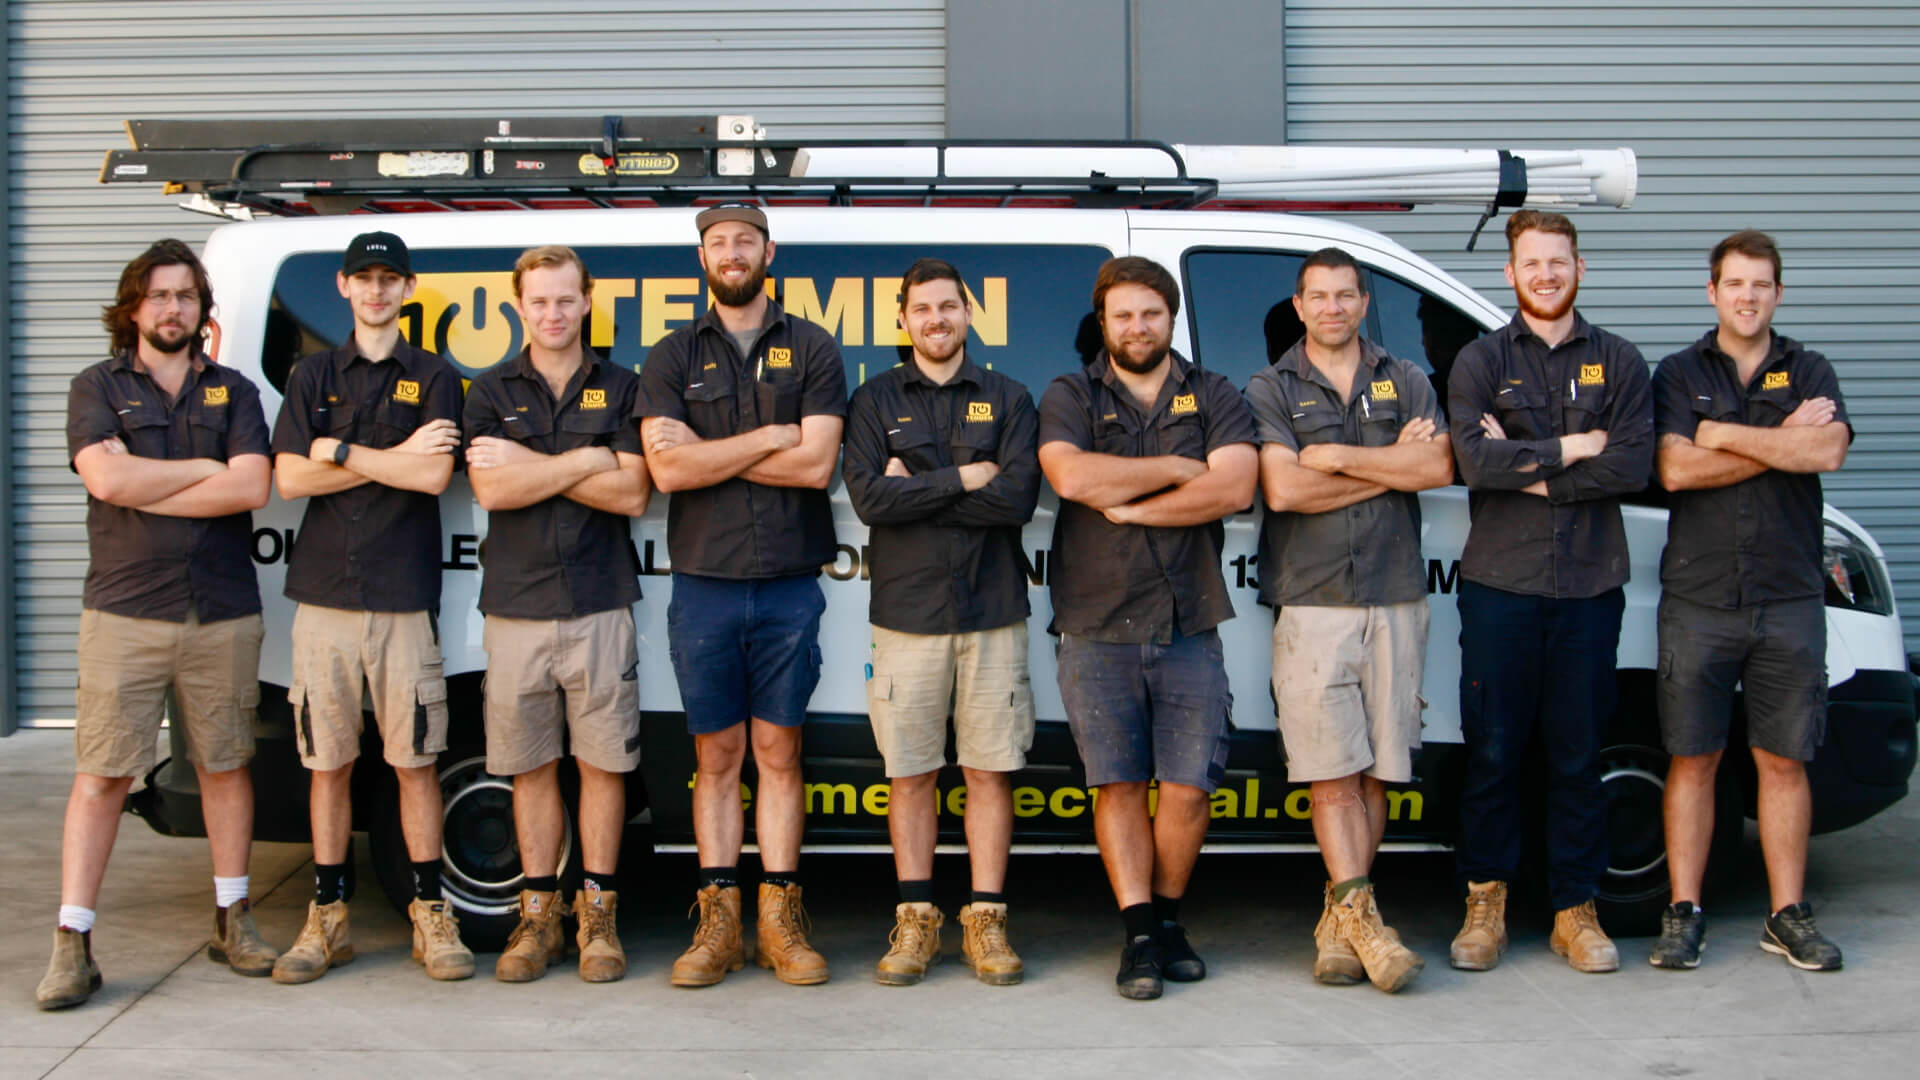 The team of Kawana electricians standing in front of the working van.